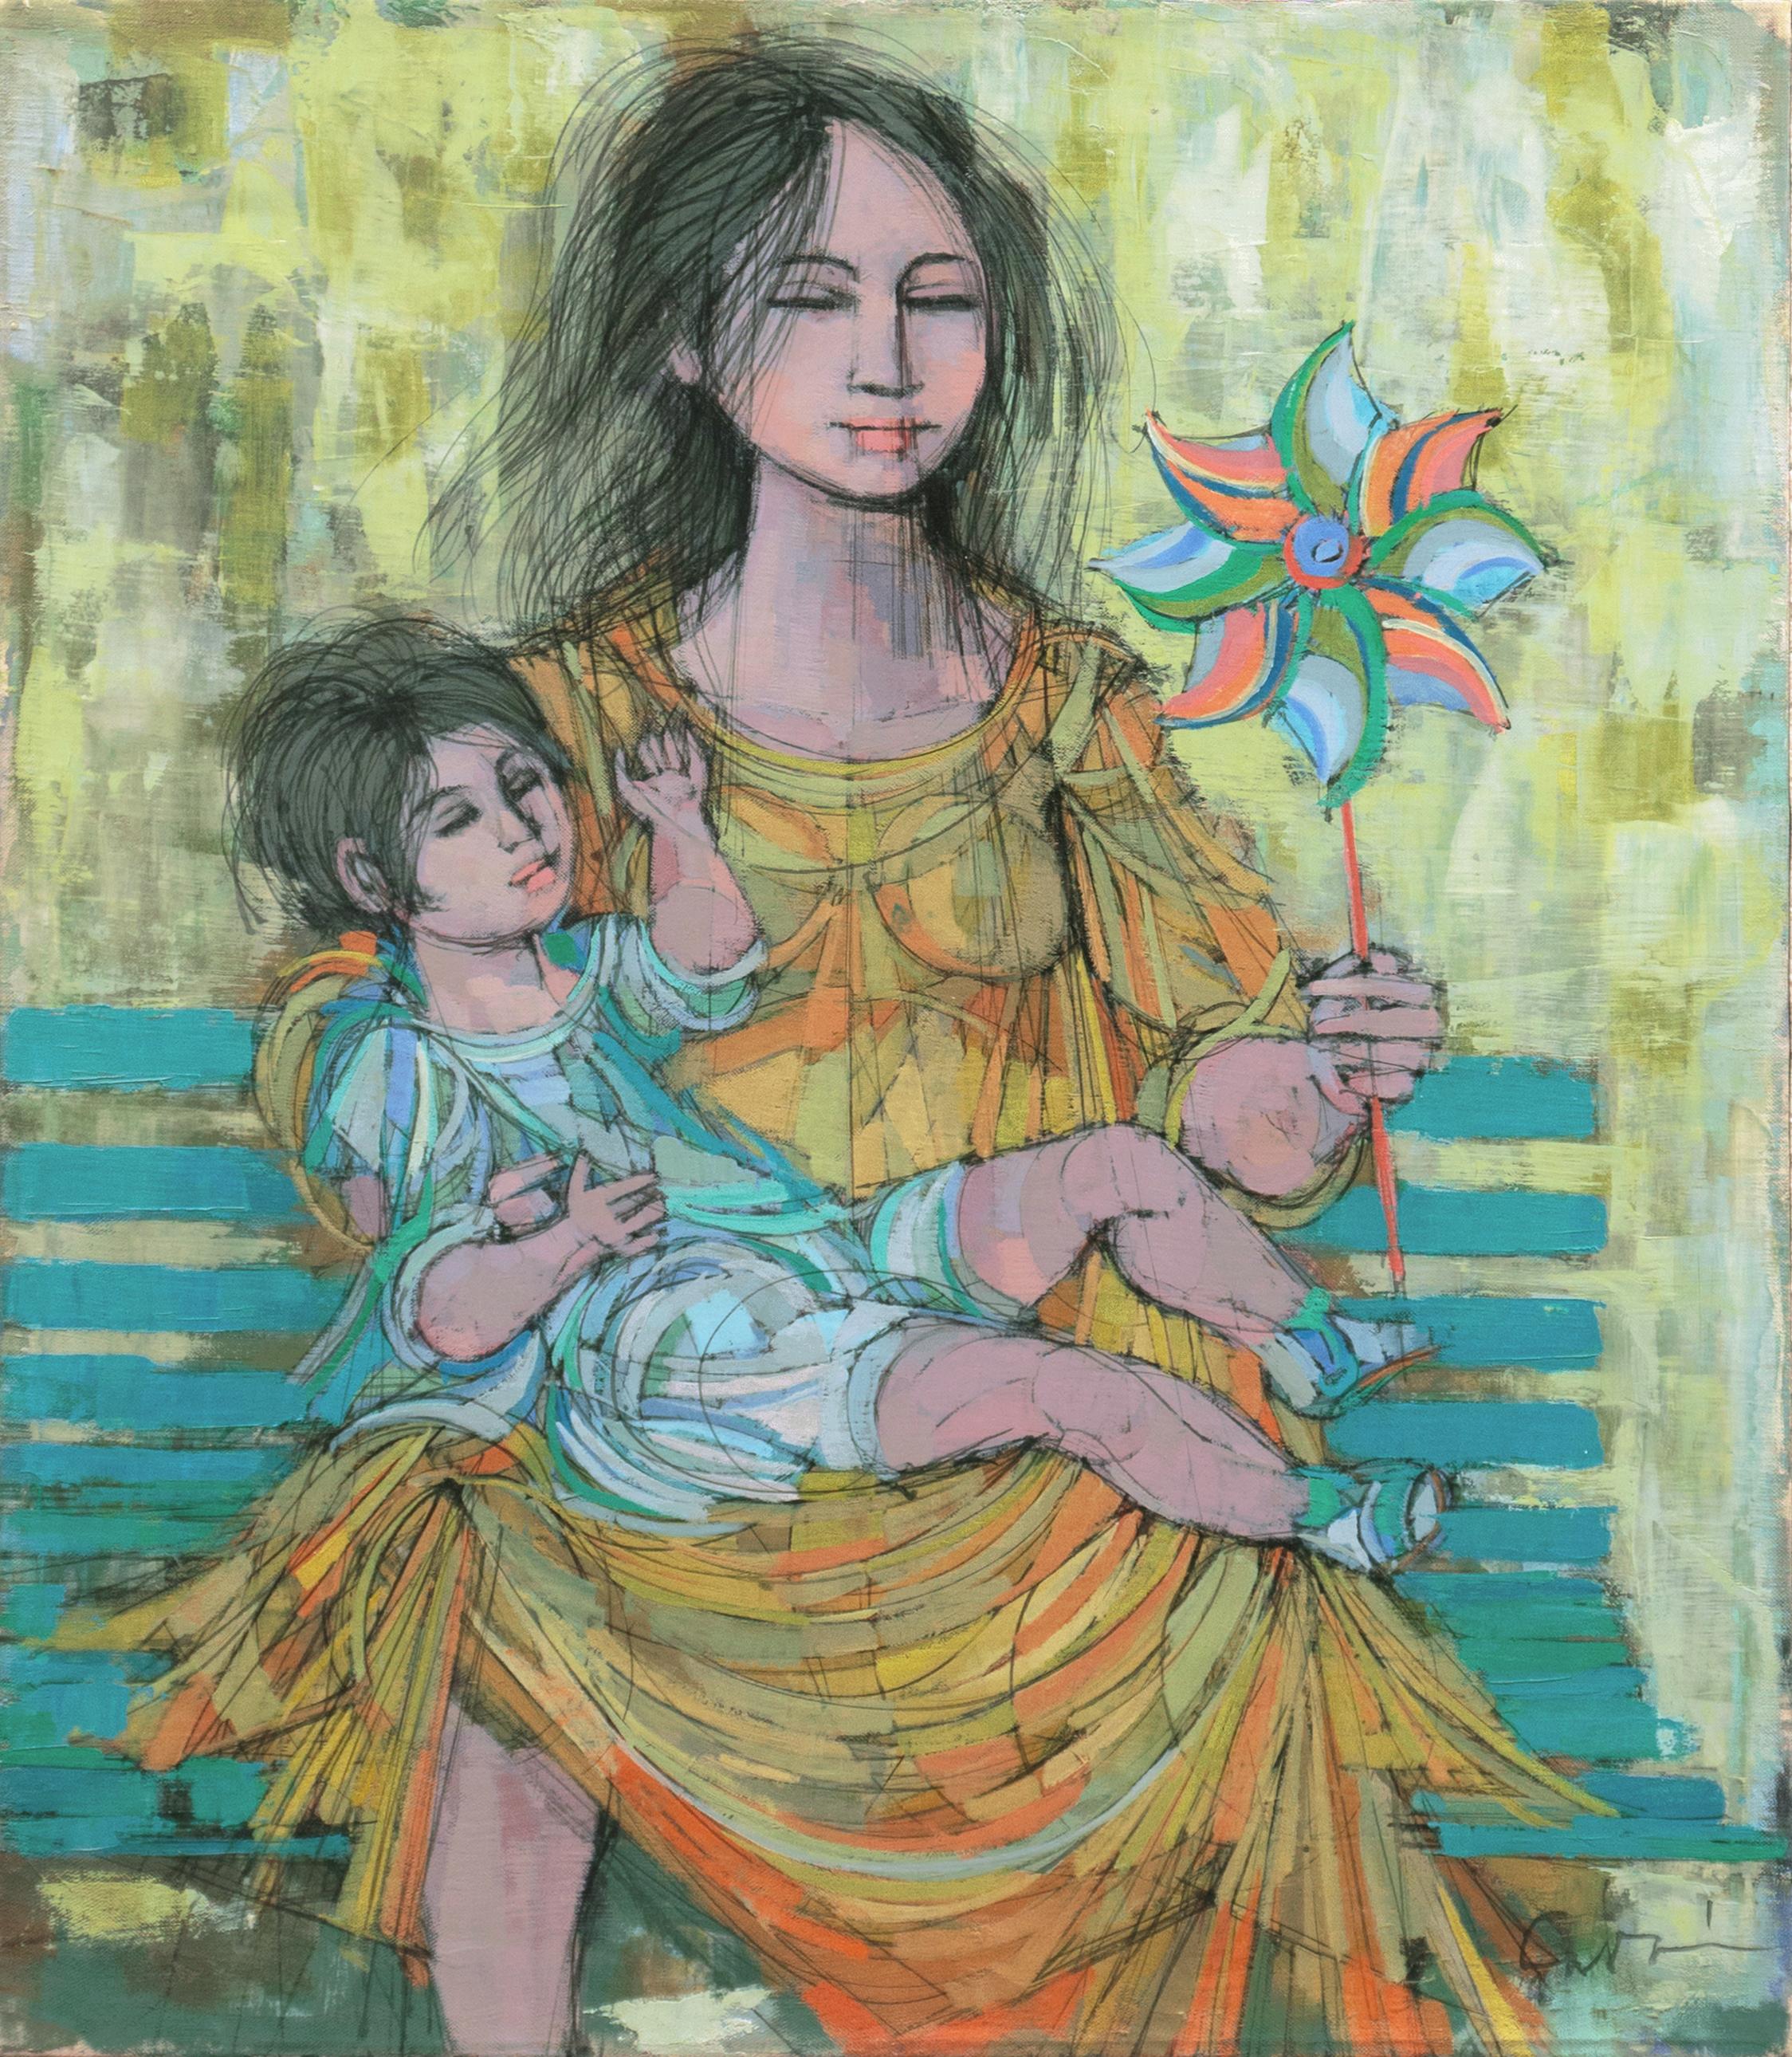 Larry Cabaniss Figurative Painting - 'Mother and Child with Rainbow Pinwheel', Paris, Rome, New York, AIC, Chicago 